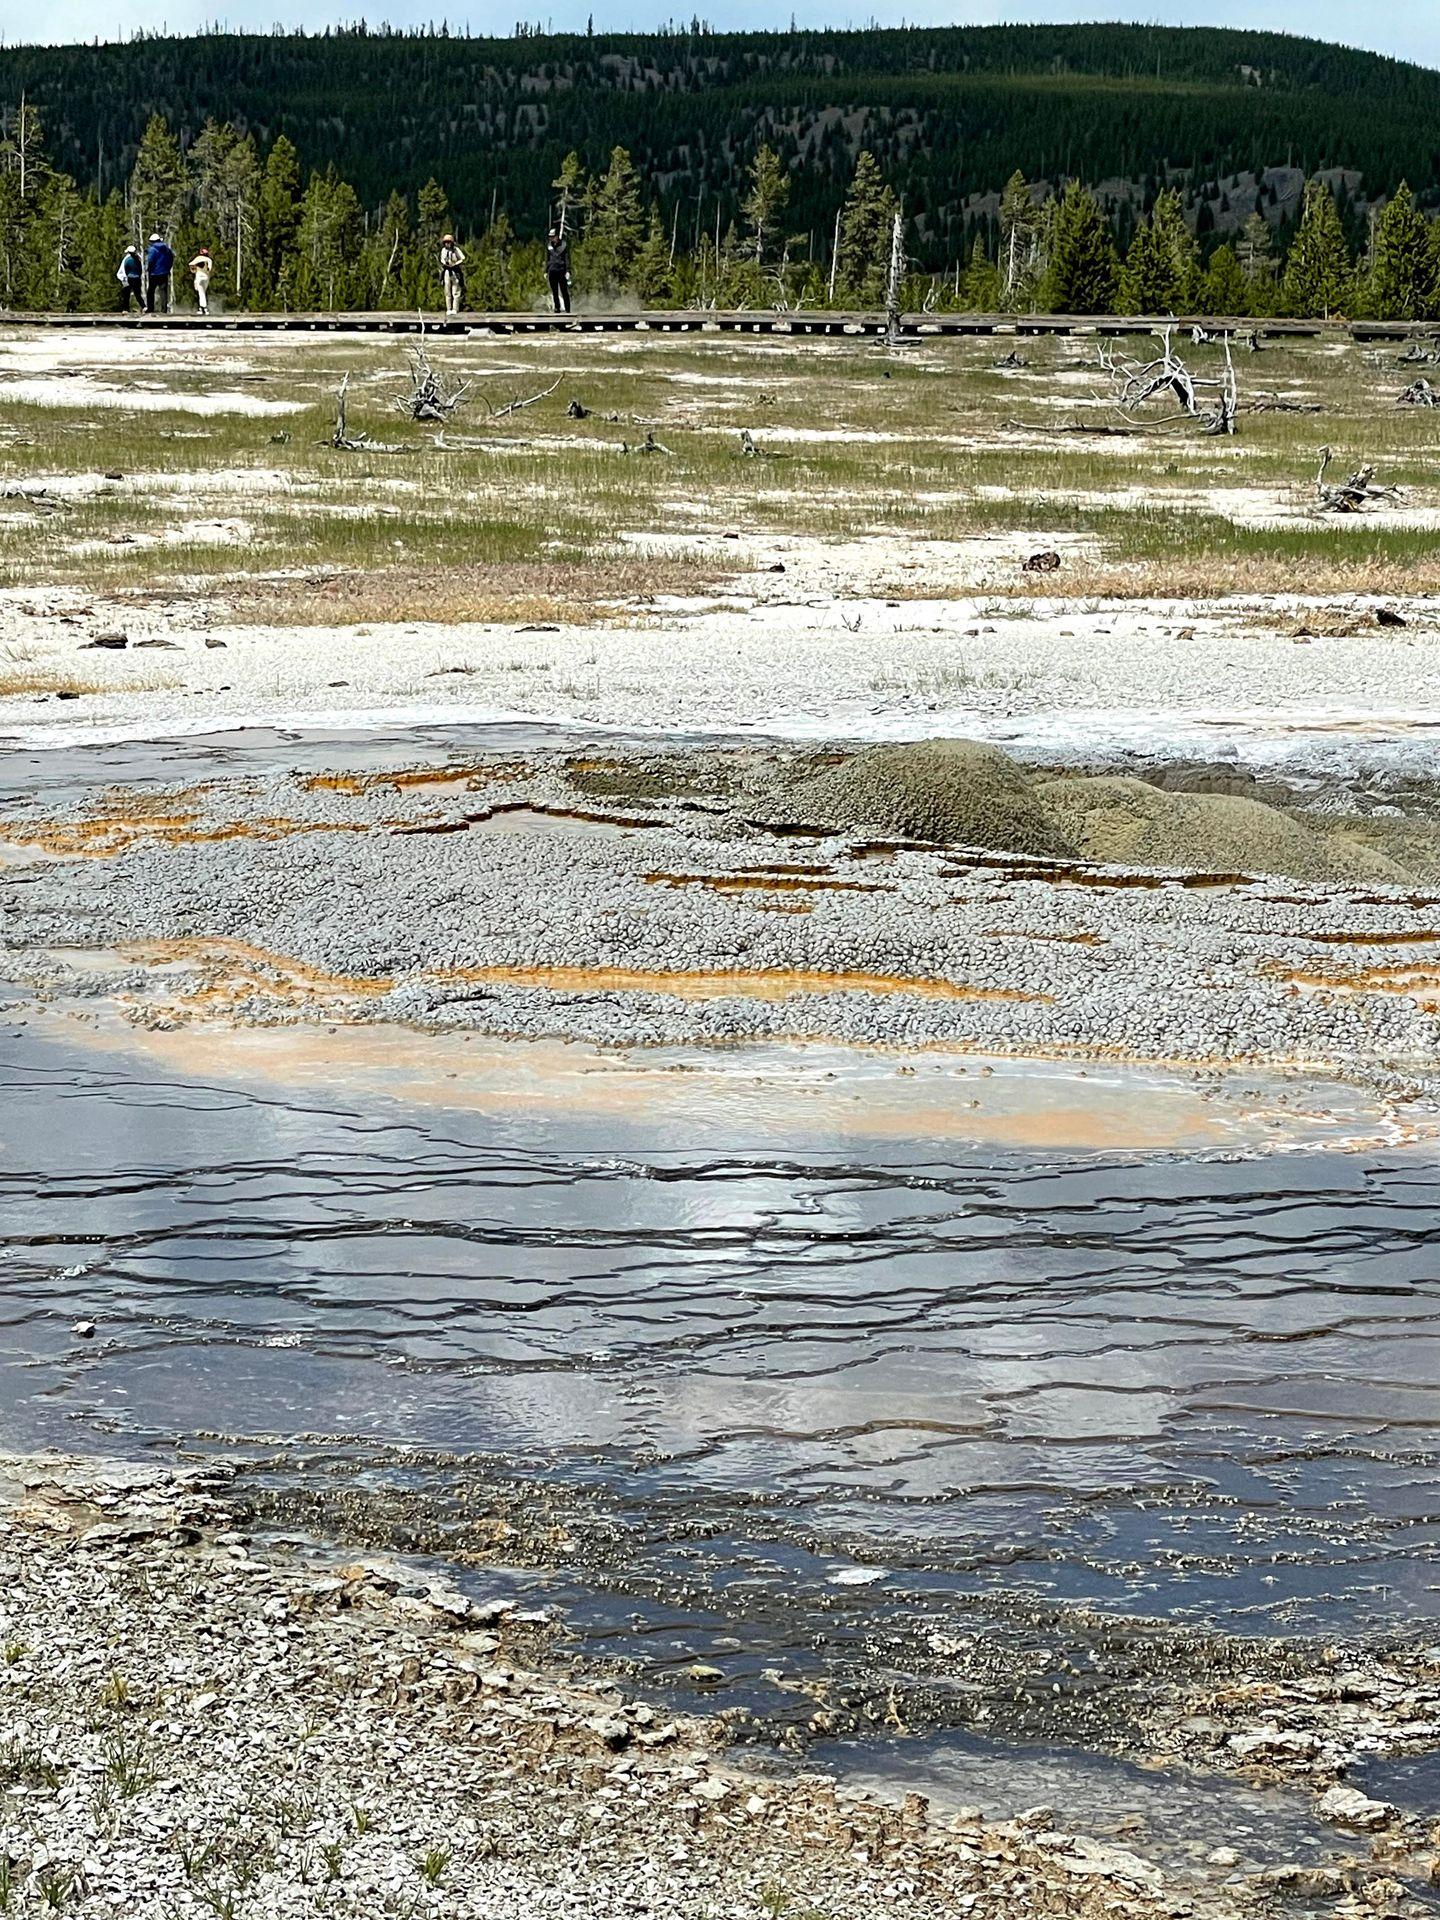 An area of blue and orange hot springs in the Biscuit Basin area.